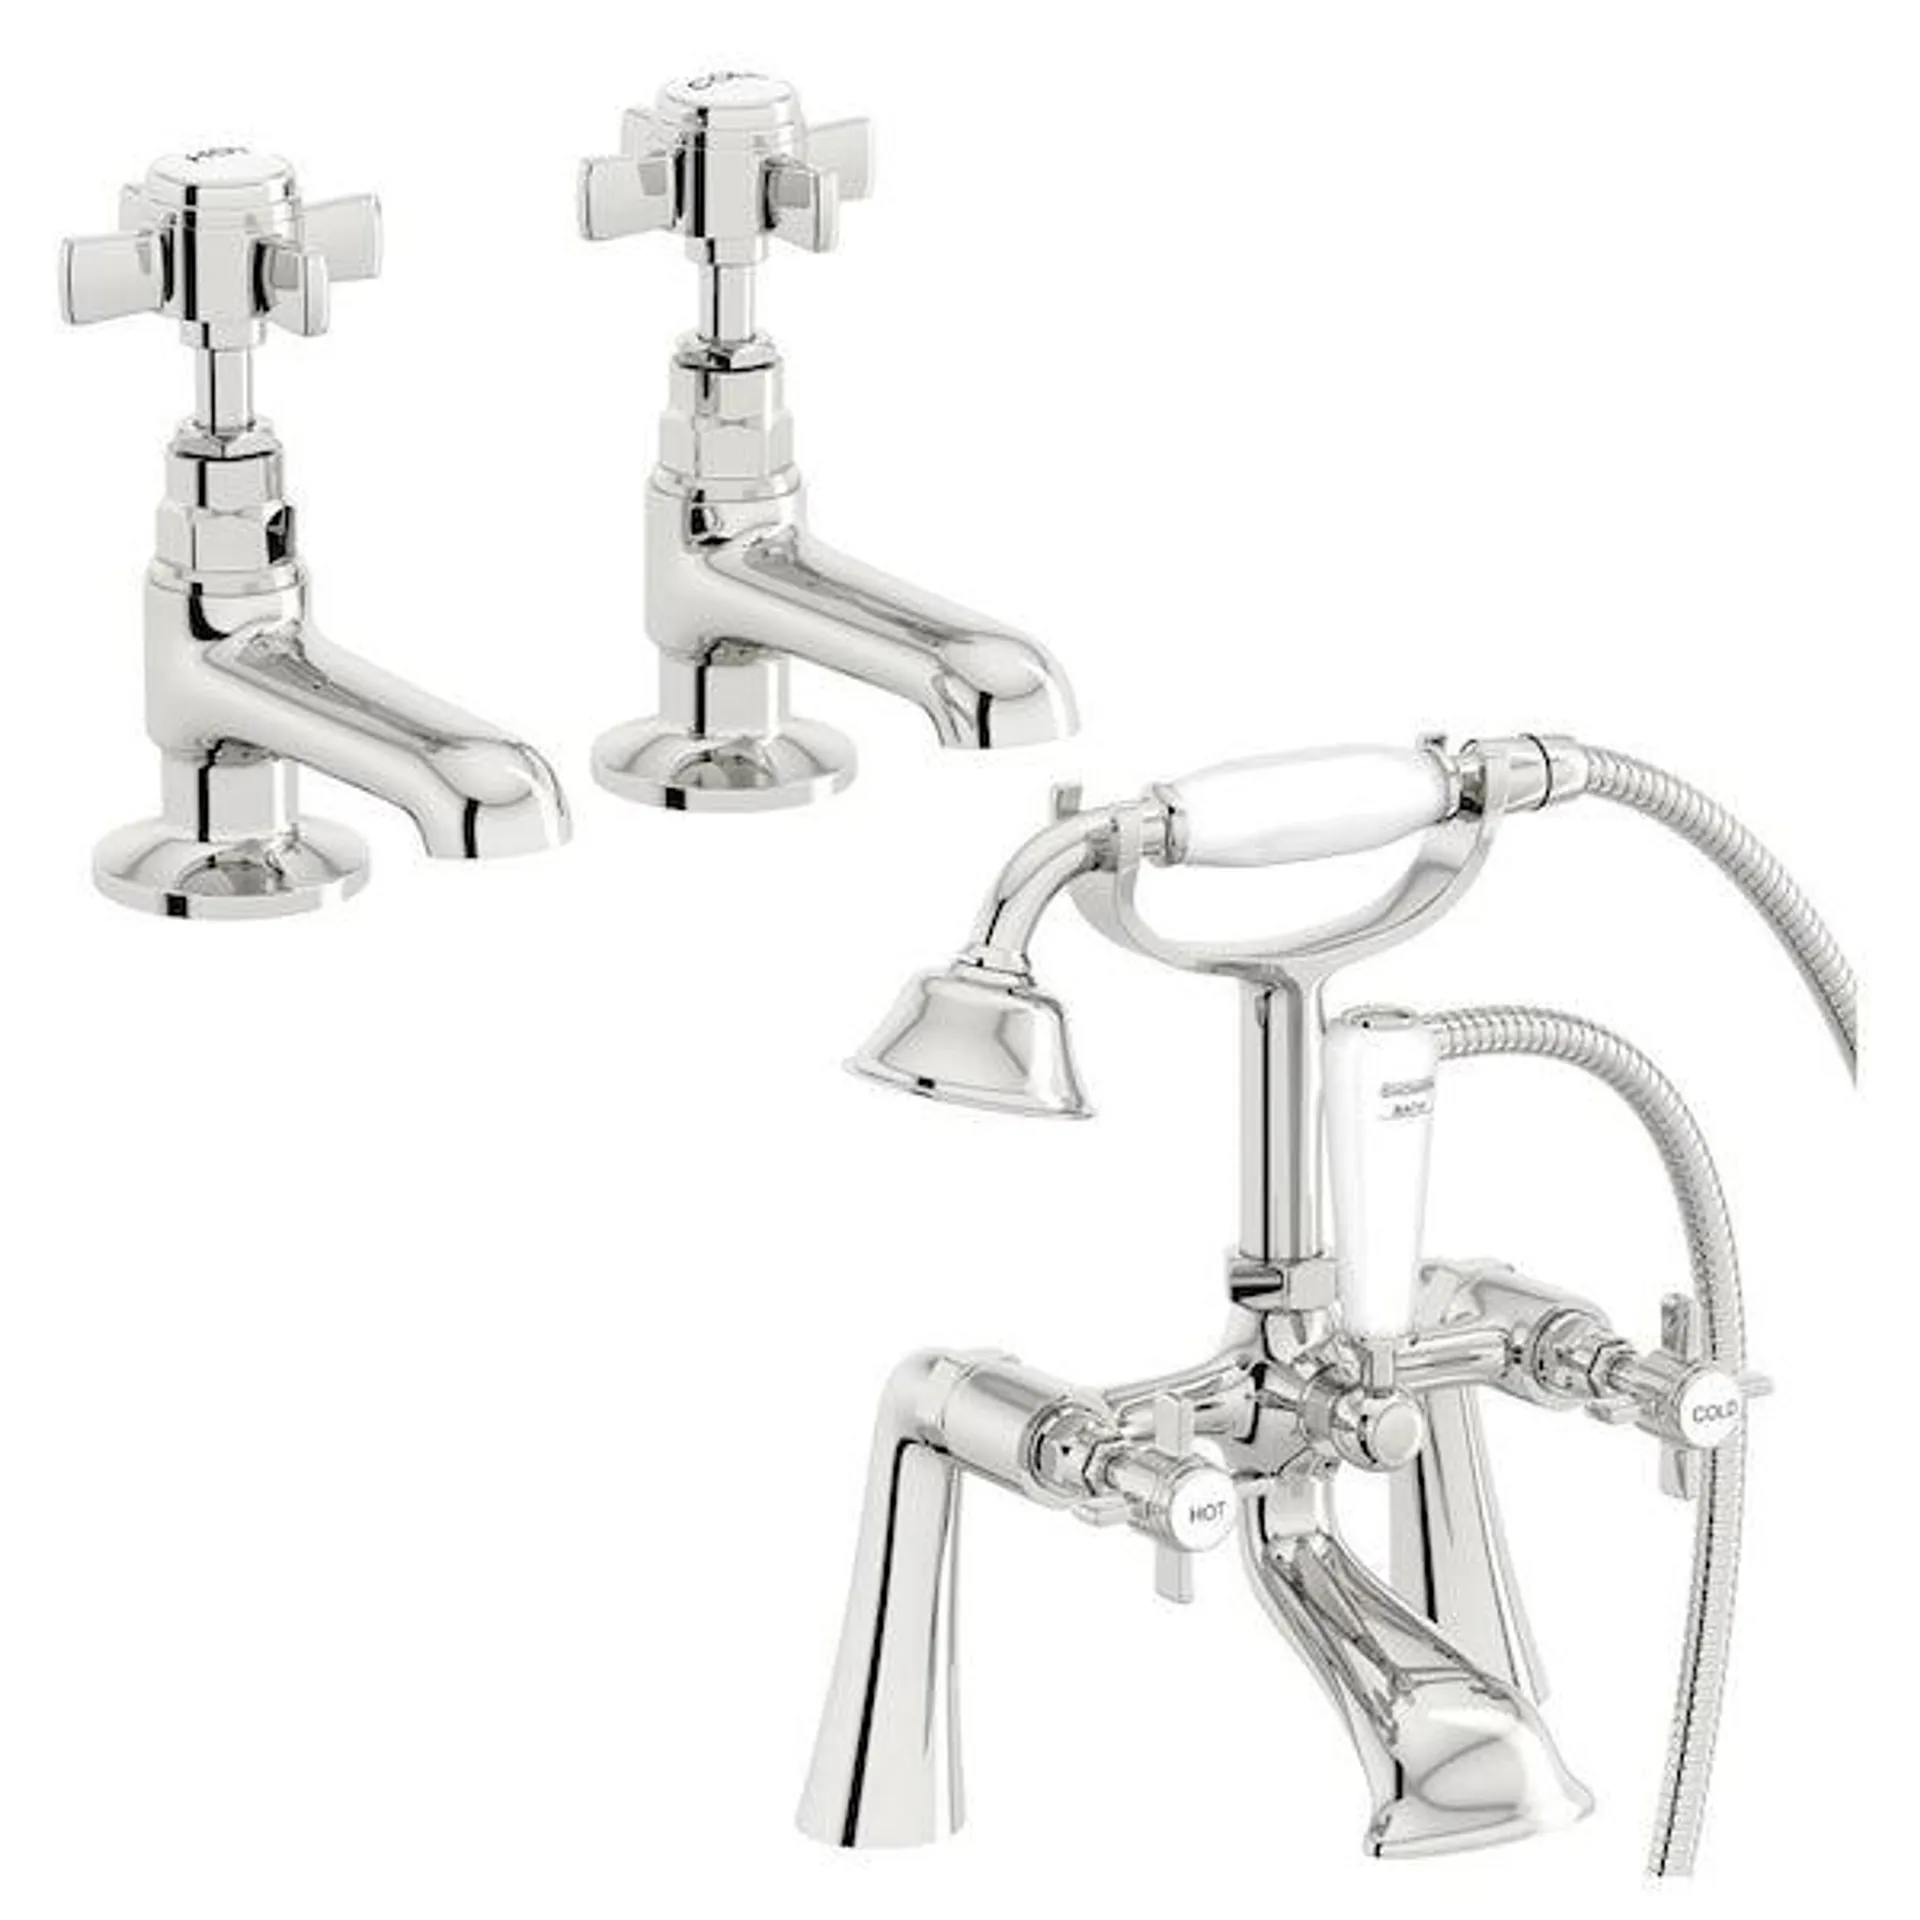 Orchard Dulwich basin tap and bath shower mixer tap pack